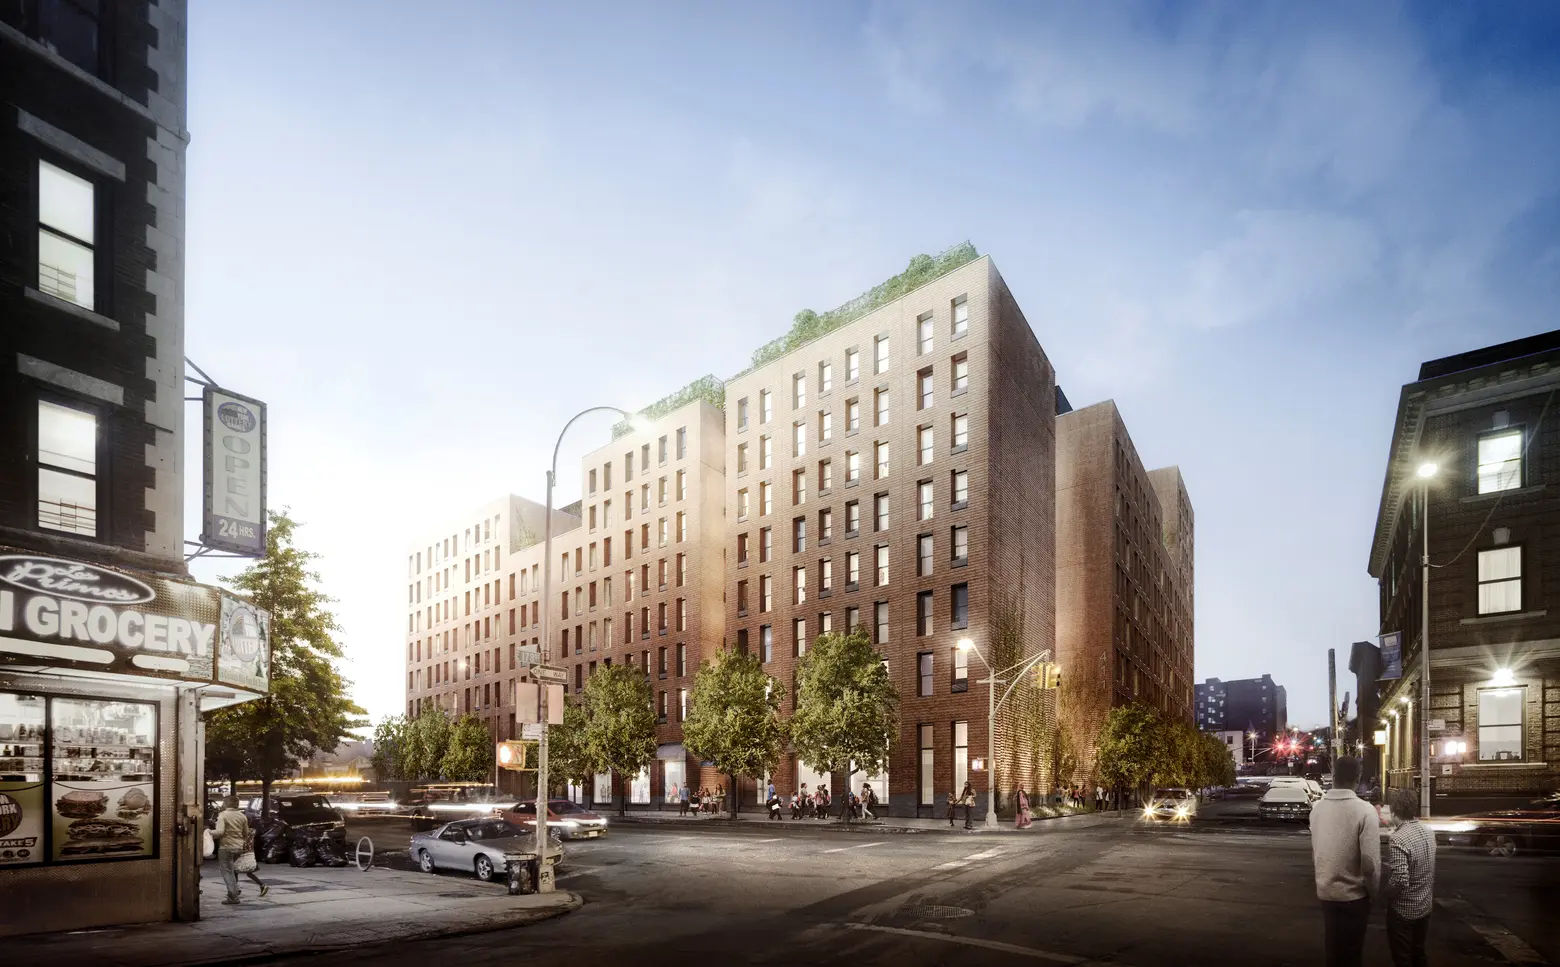 COOKFOX’s Massive Affordable Housing Development Pushes Forward in the Bronx